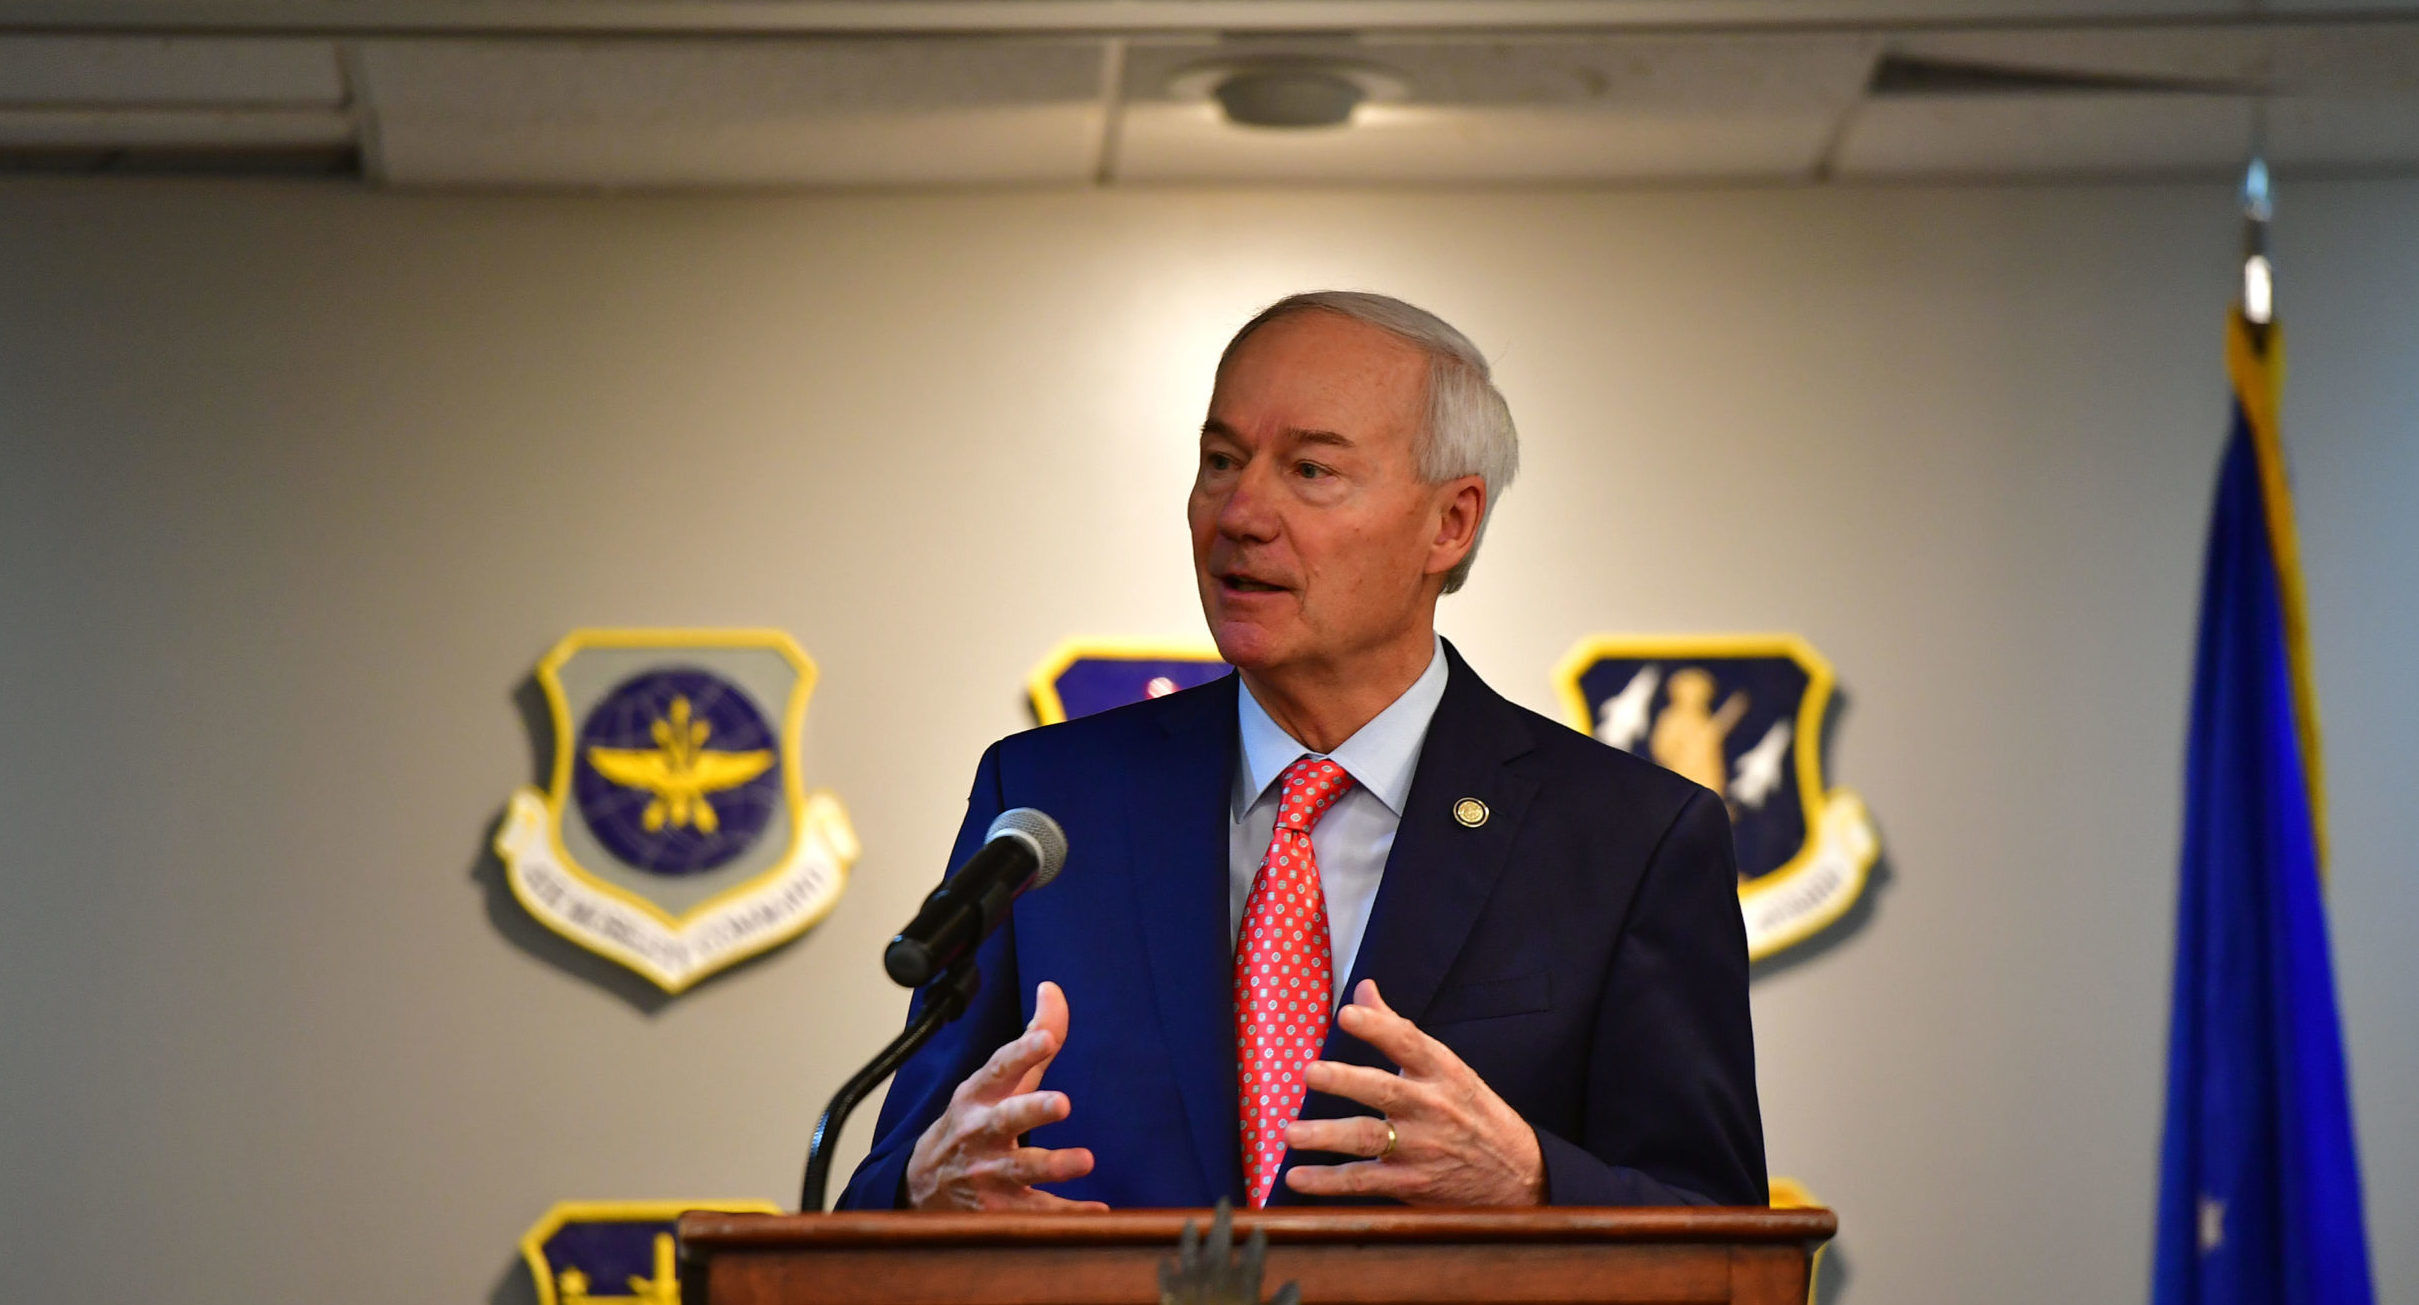 Gov. Asa Hutchinson speaks to Team Little Rock members during a quarterly community council meeting at Little Rock Air Force Base, Arkansas, Aug. 13, 2019.